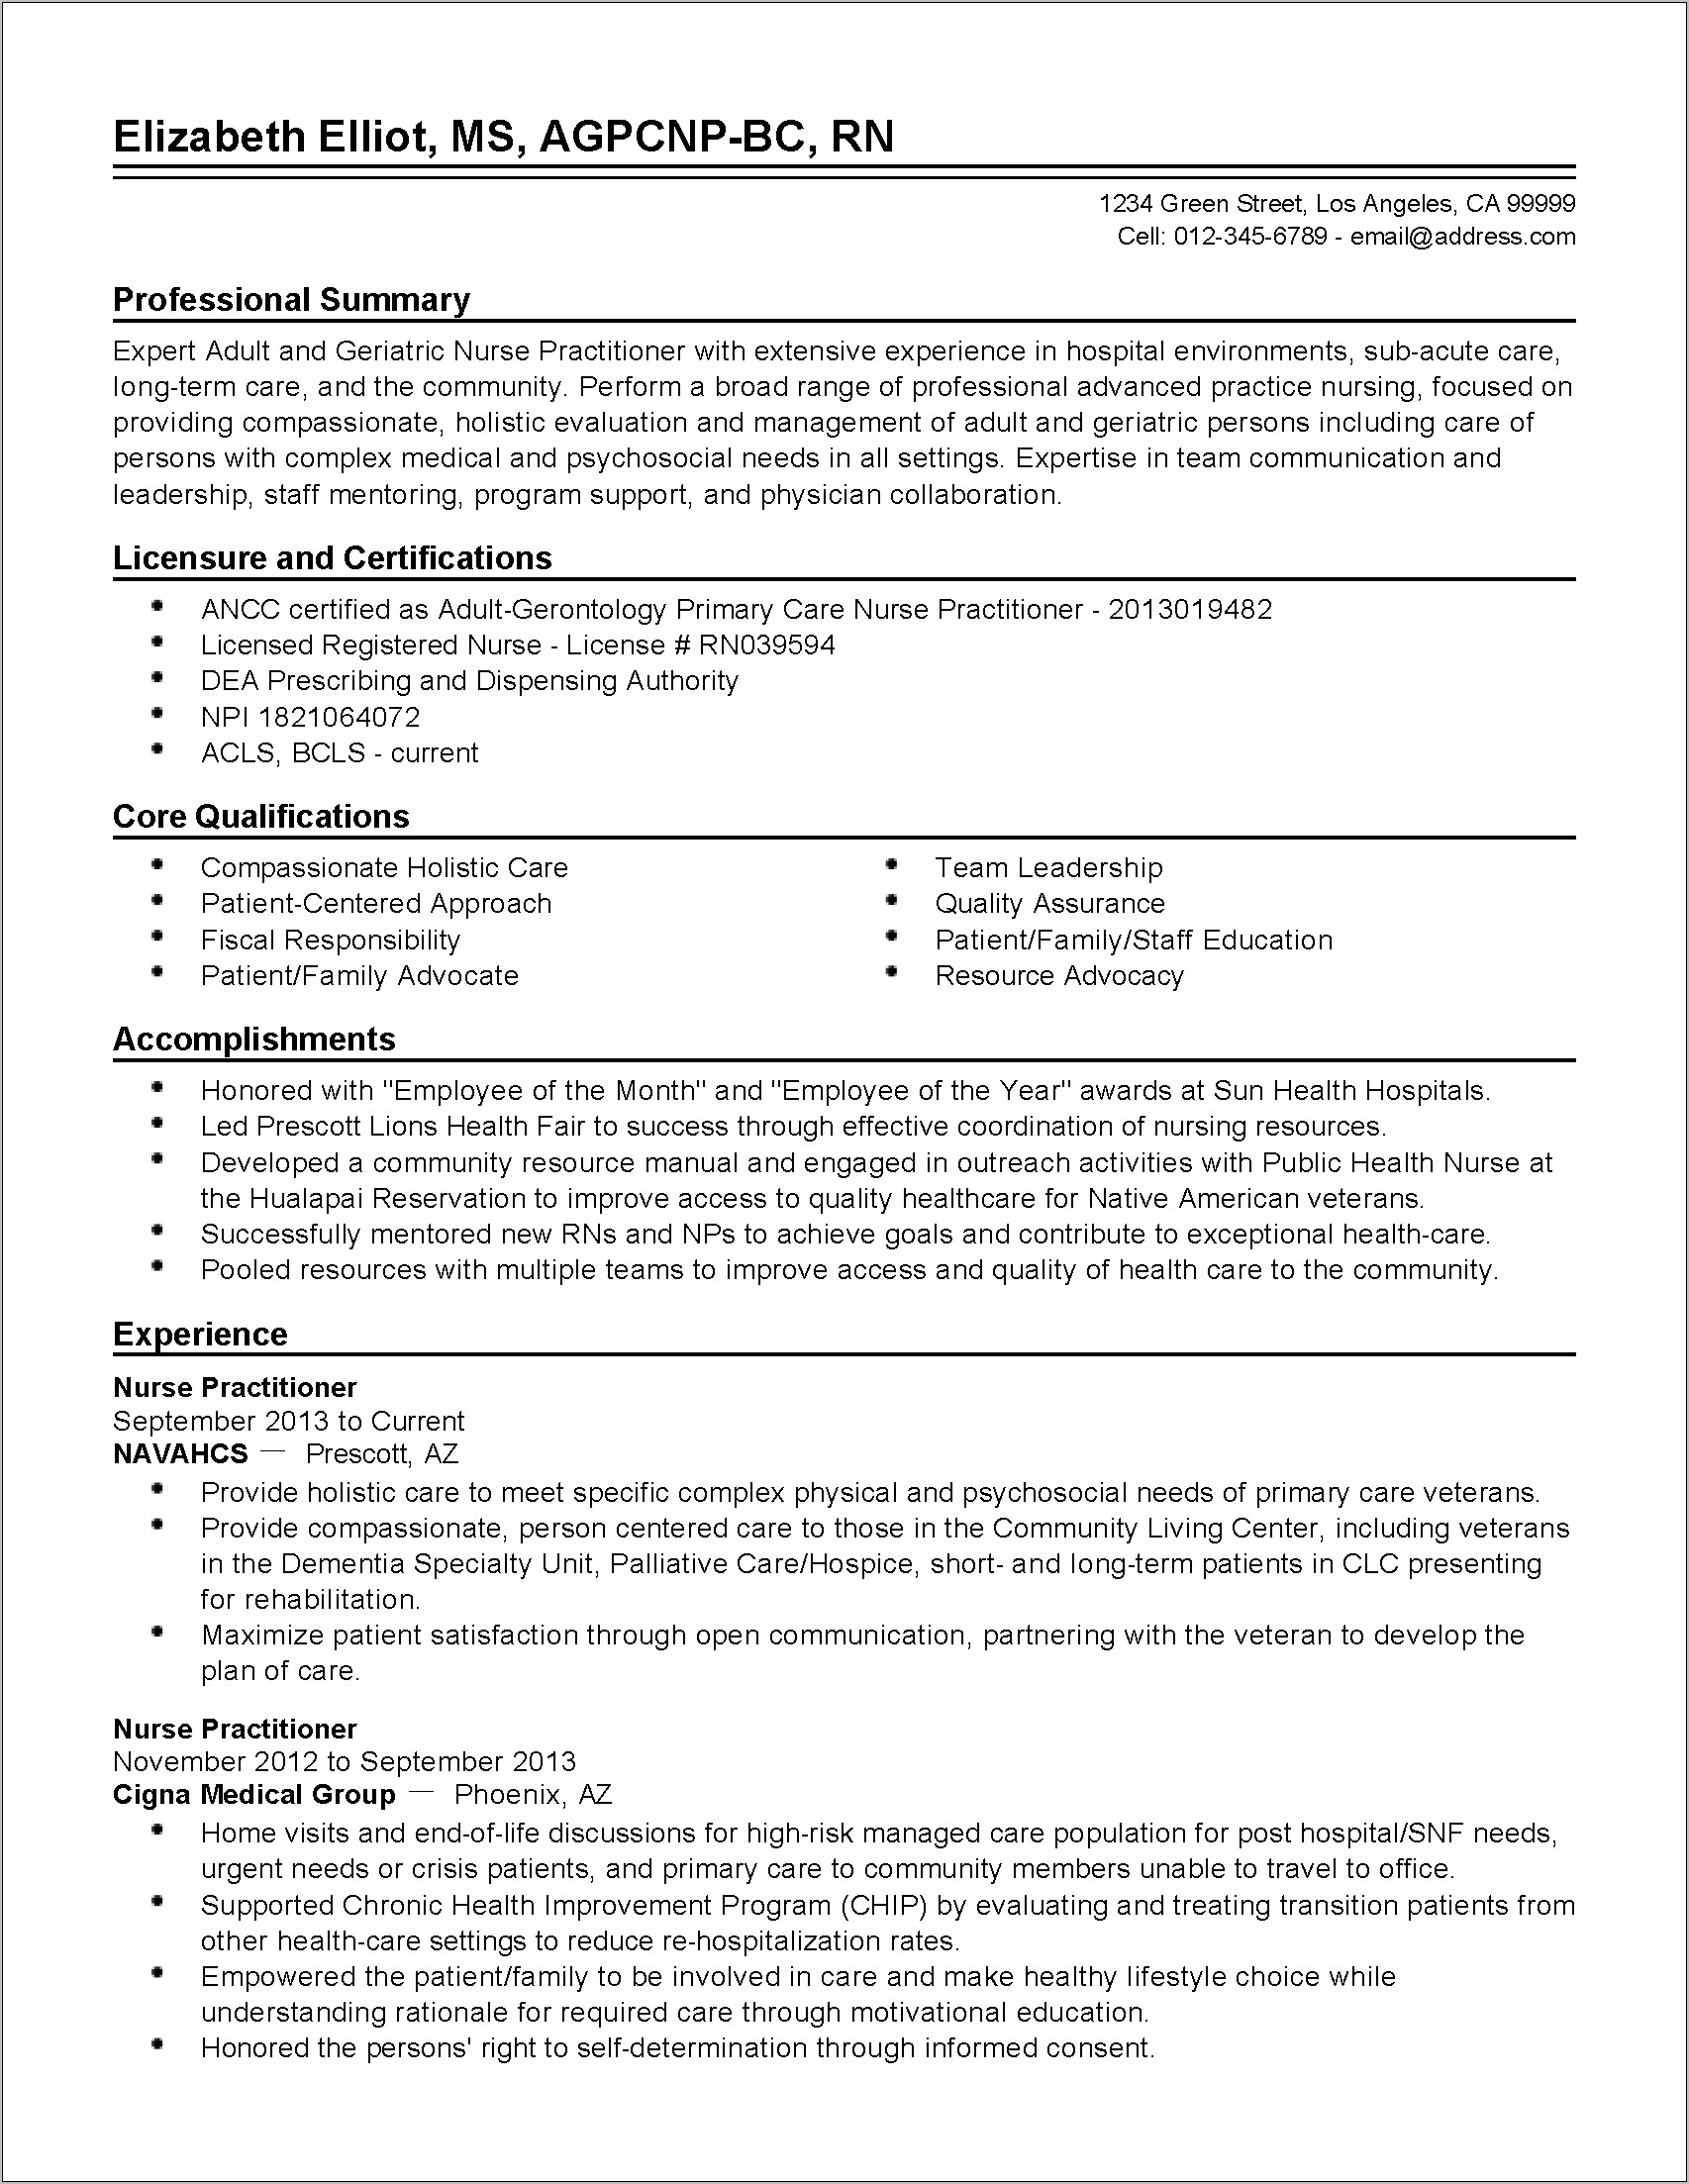 Nurse Practitioner Resume Example With Summary